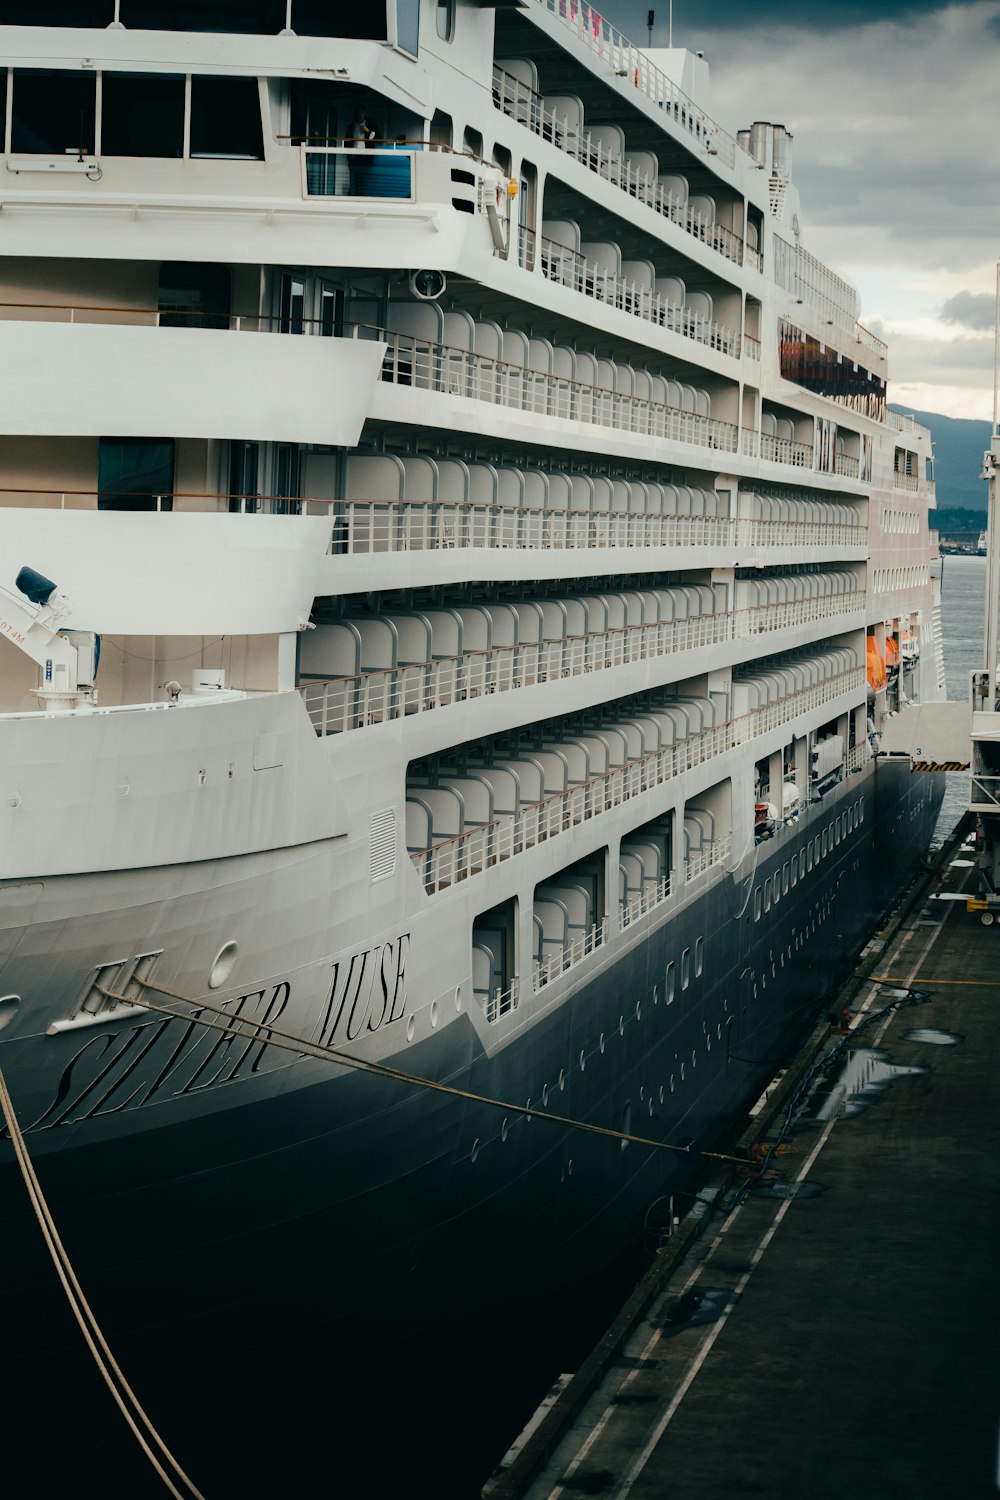 a large cruise ship docked at a dock